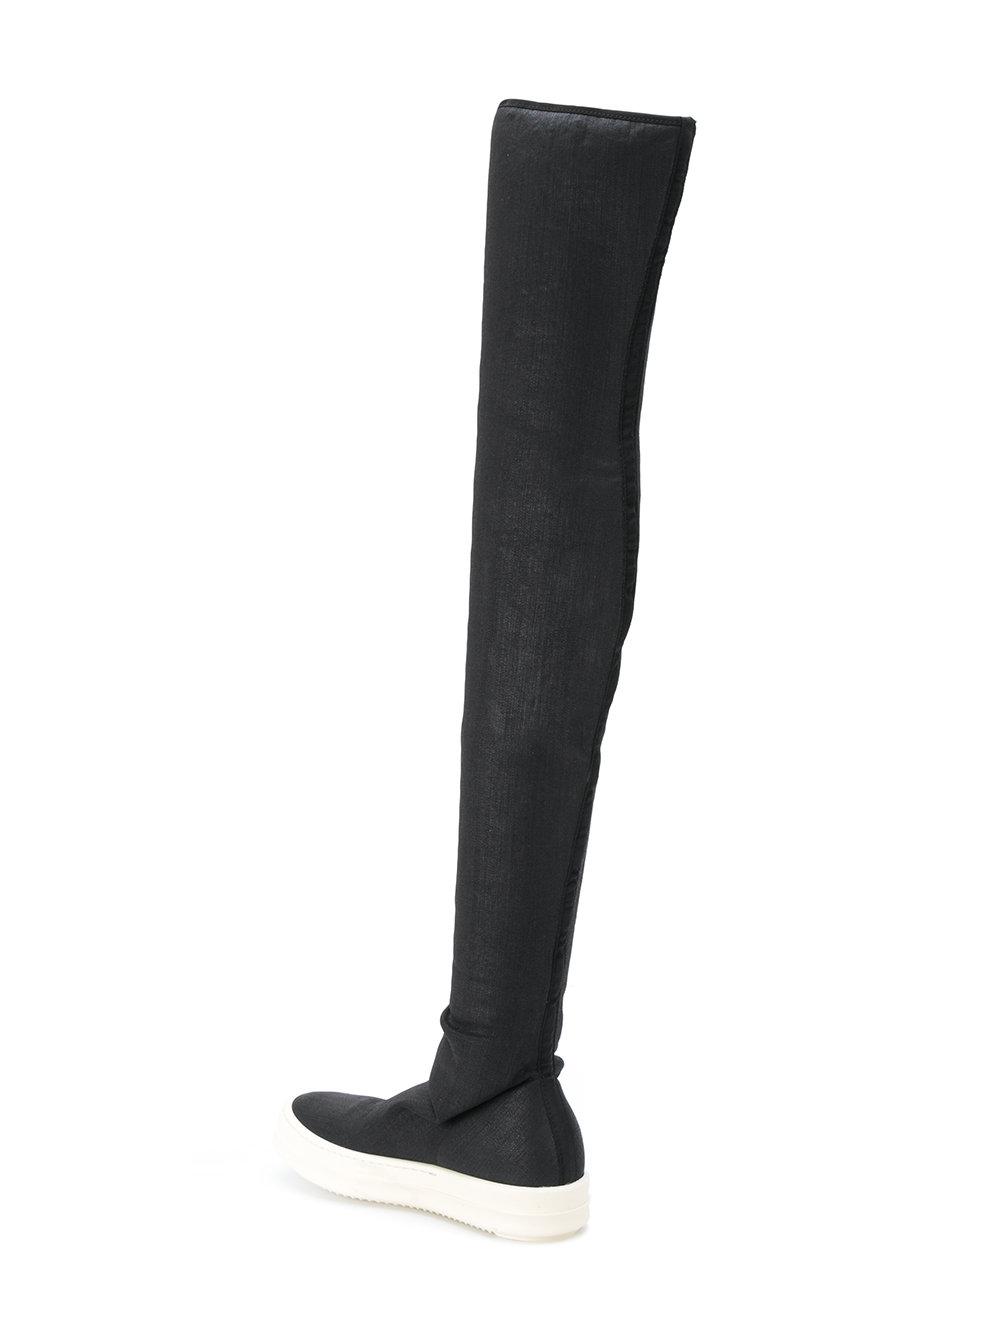 Rick Owens Drkshdw Rubber Sneaker Thigh High Boots in Black - Lyst